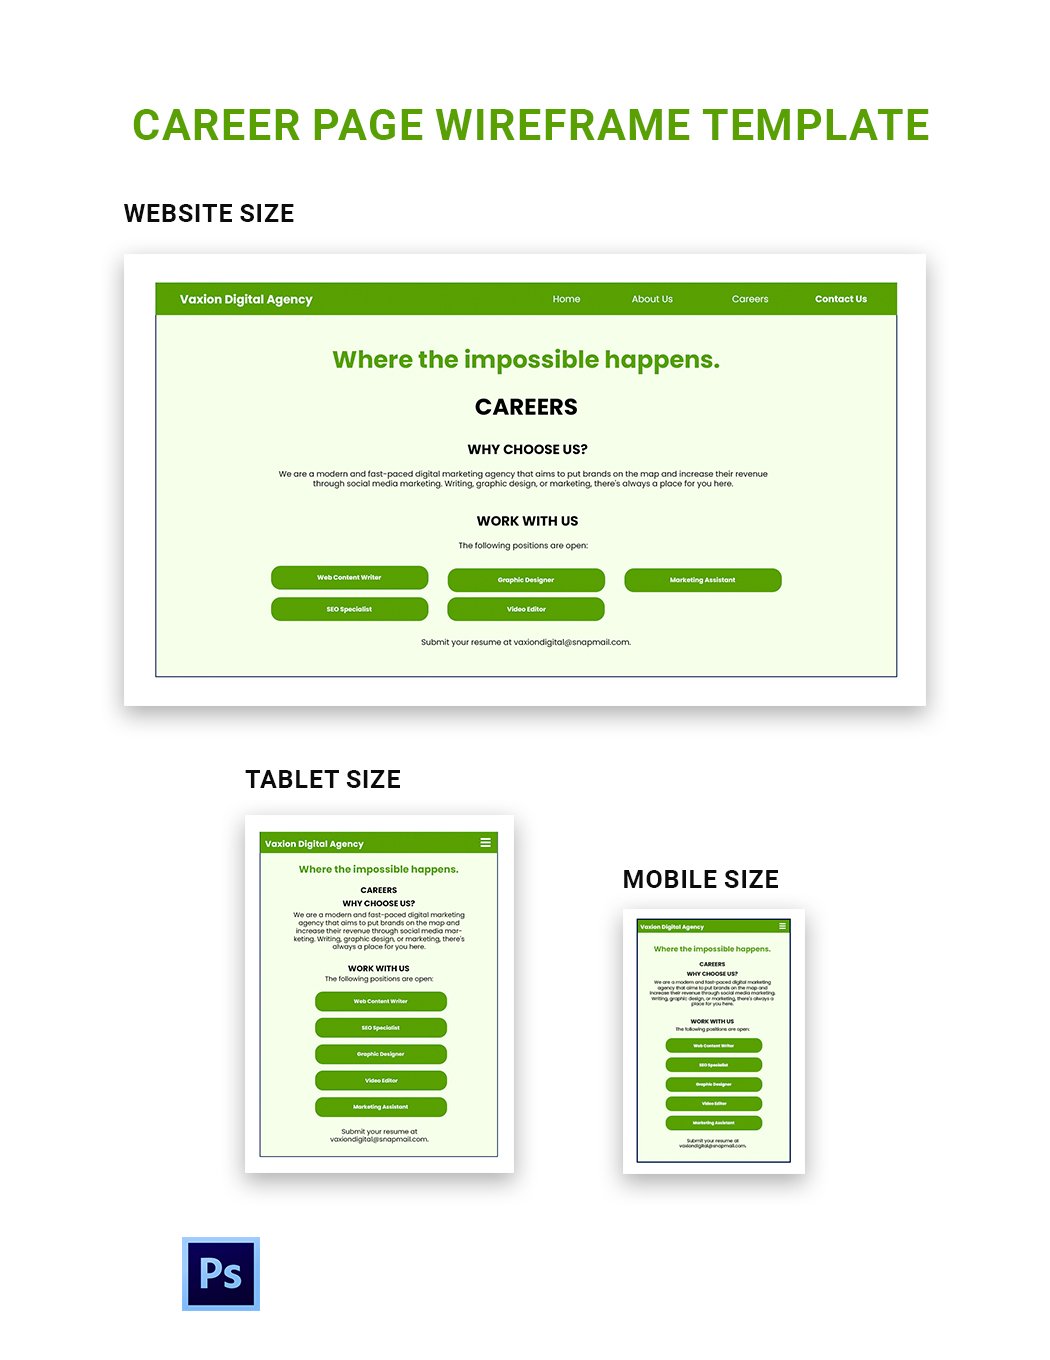 Career Page Wireframe Template